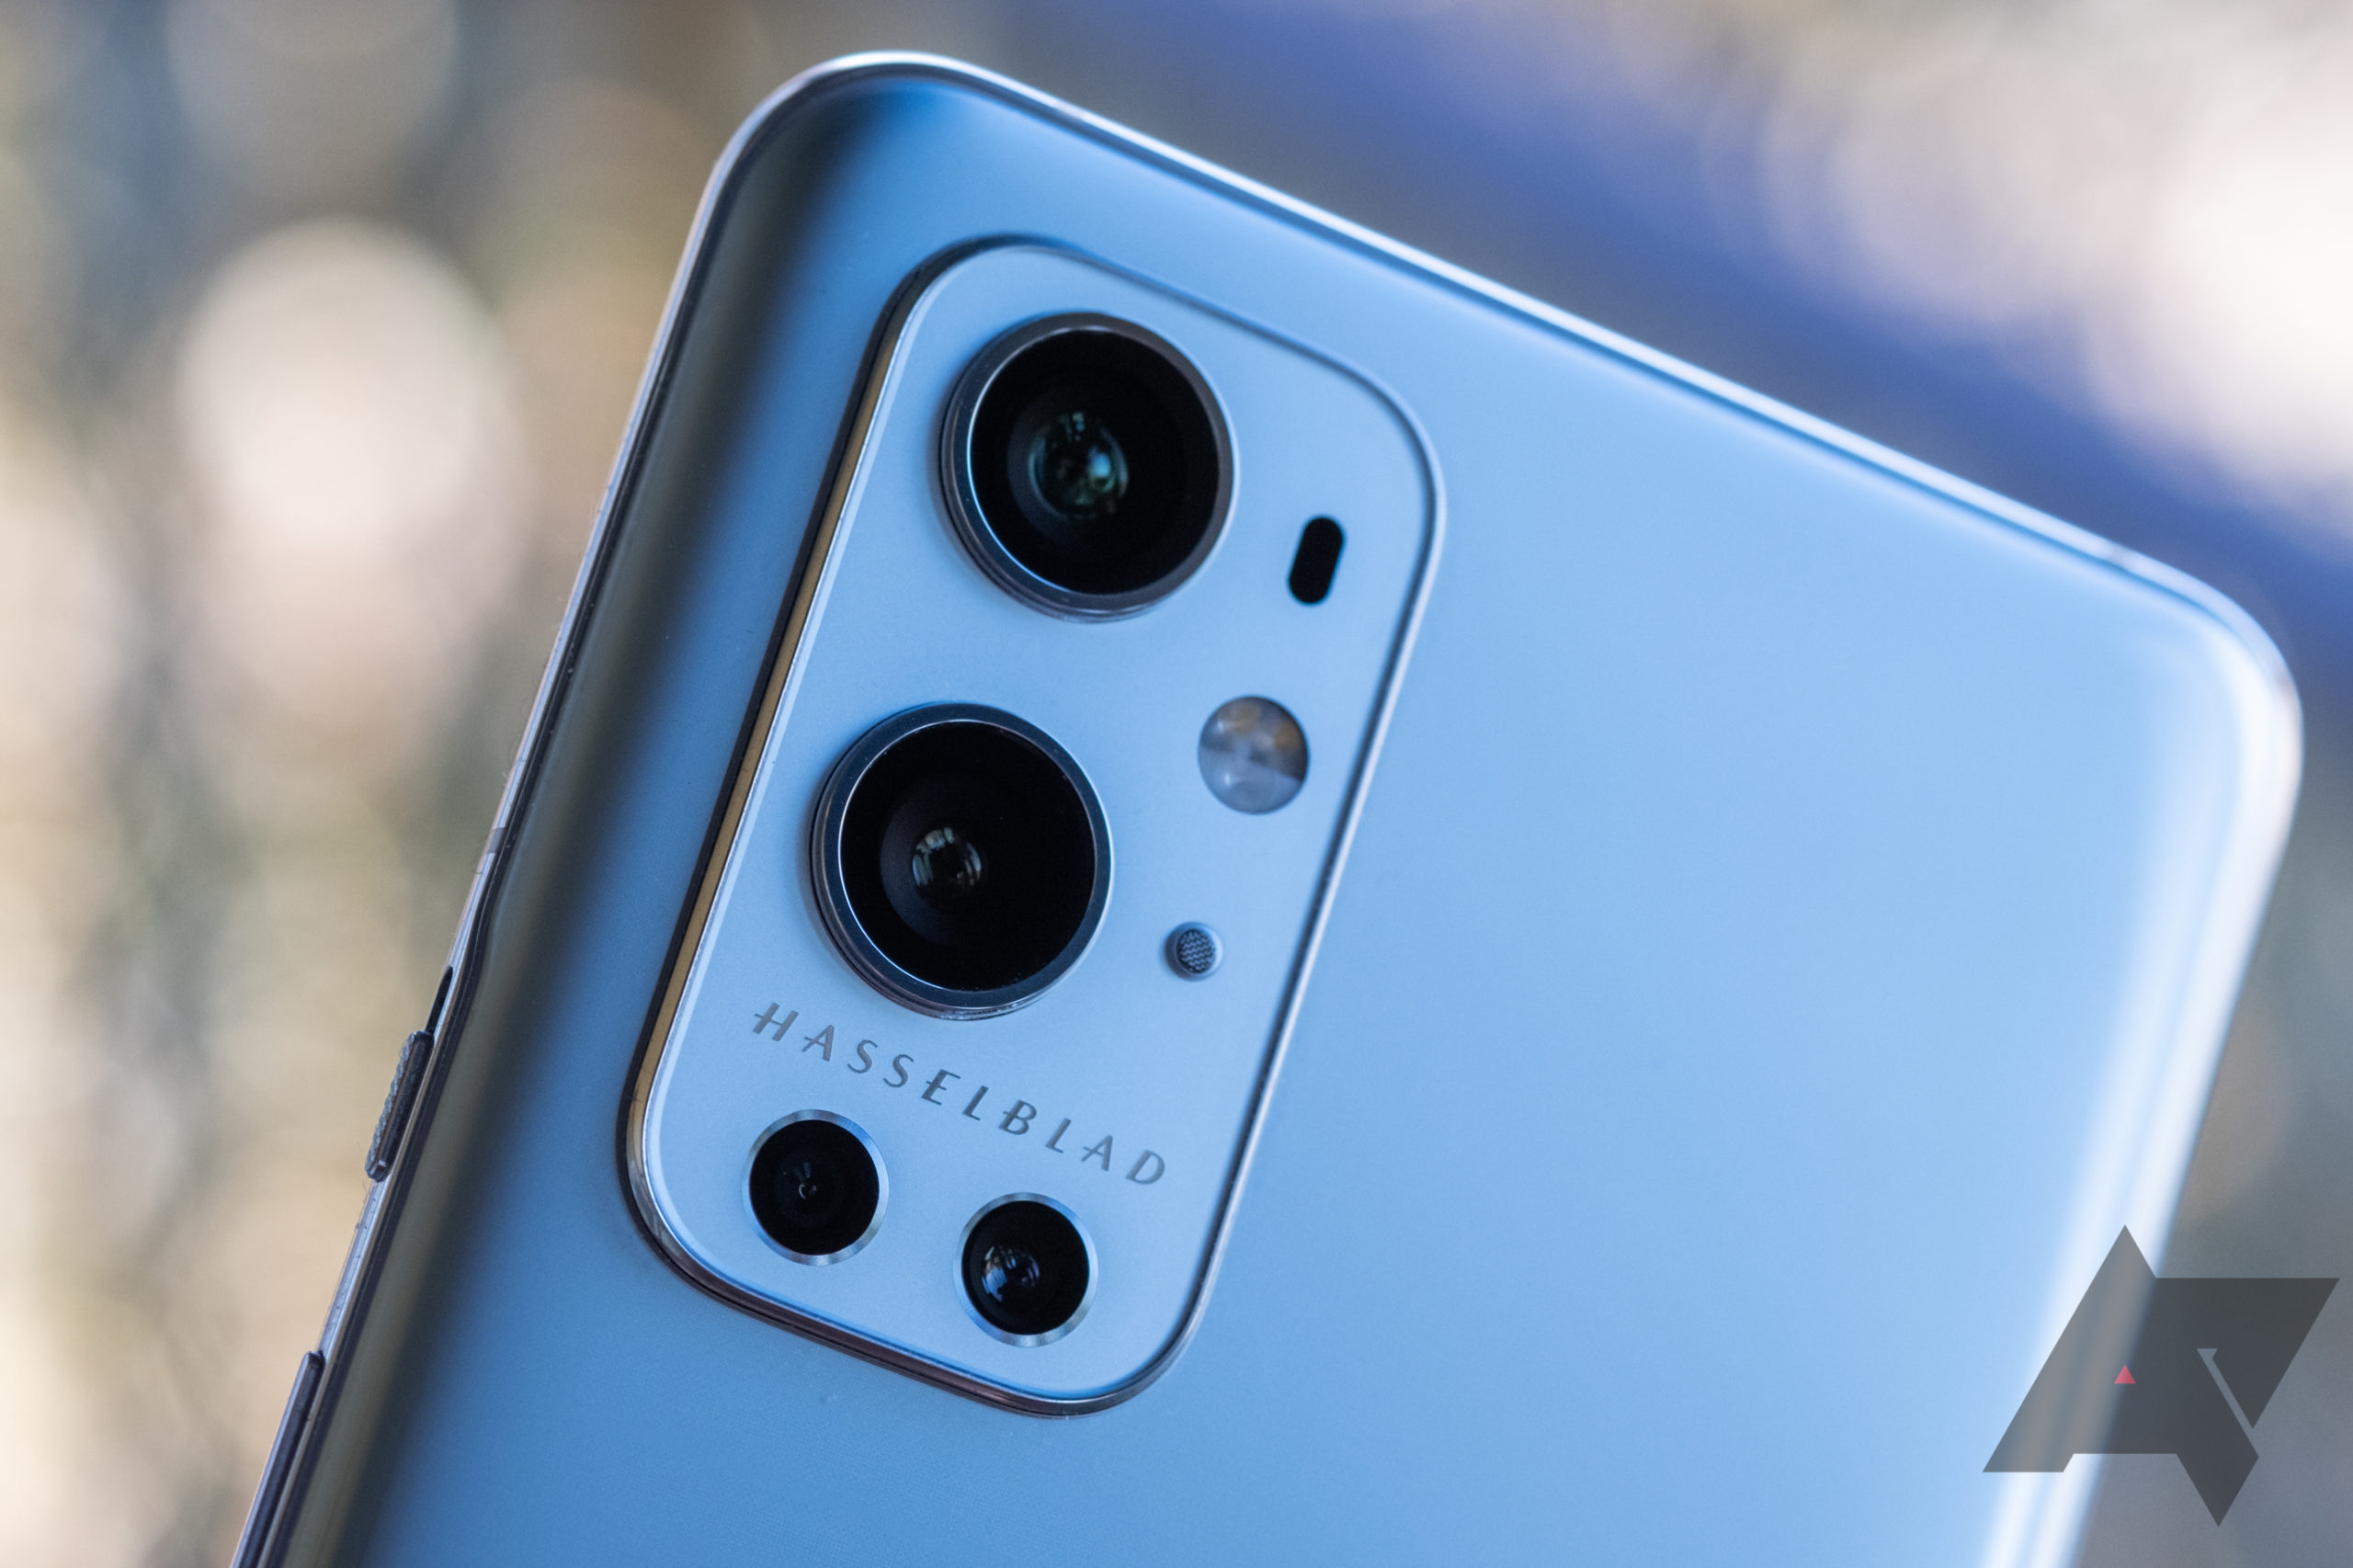 OnePlus 9 and 9 Pro update 11.2.6.6 features several camera improvements